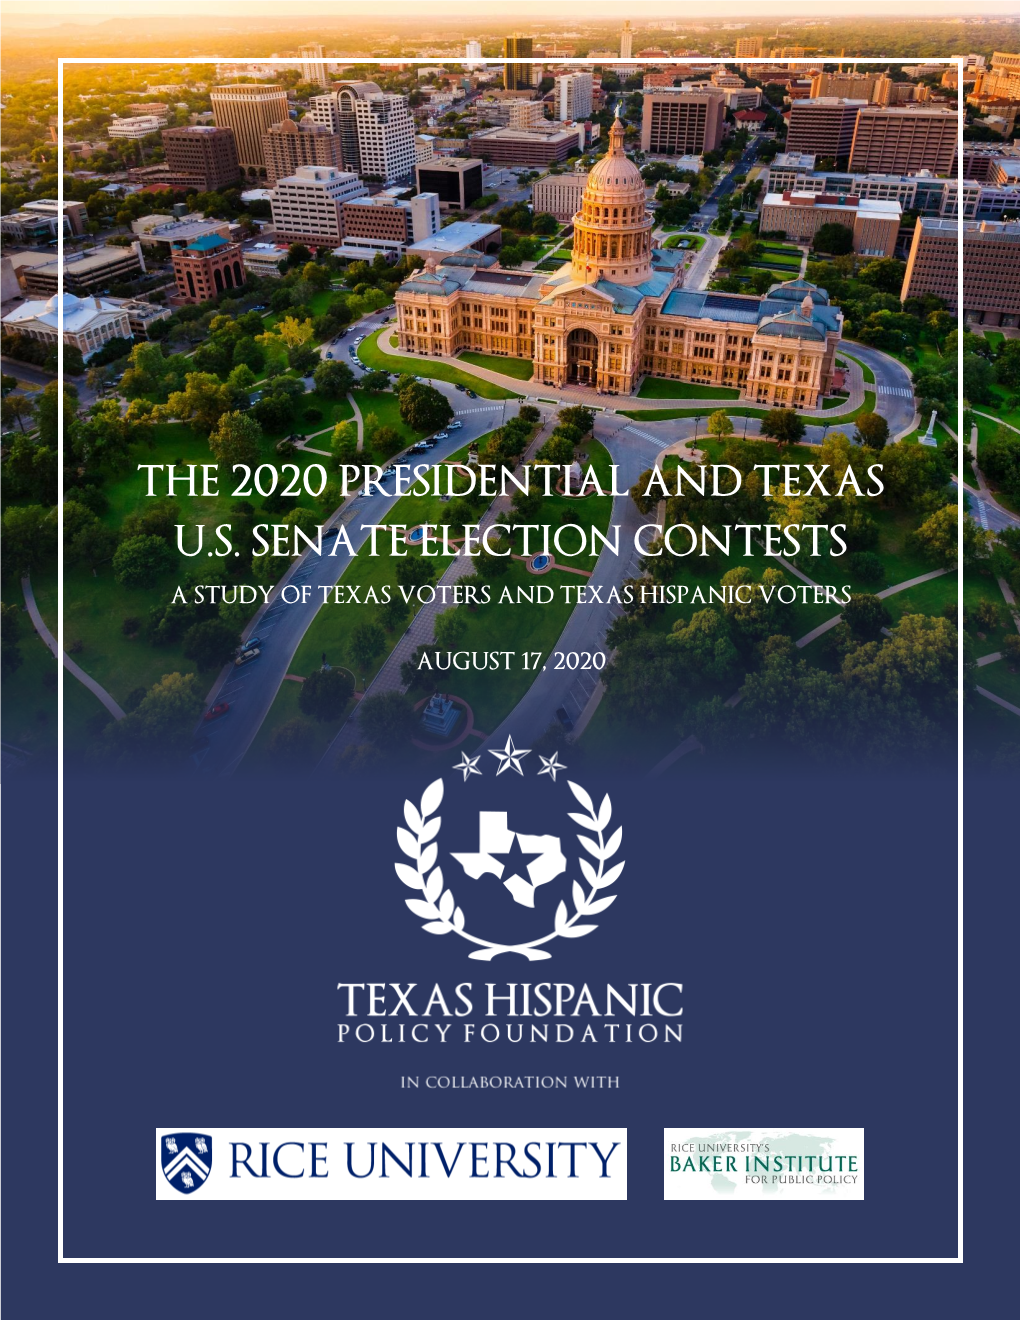 The 2020 Presidential and Texas U.S. Senate Election Contests